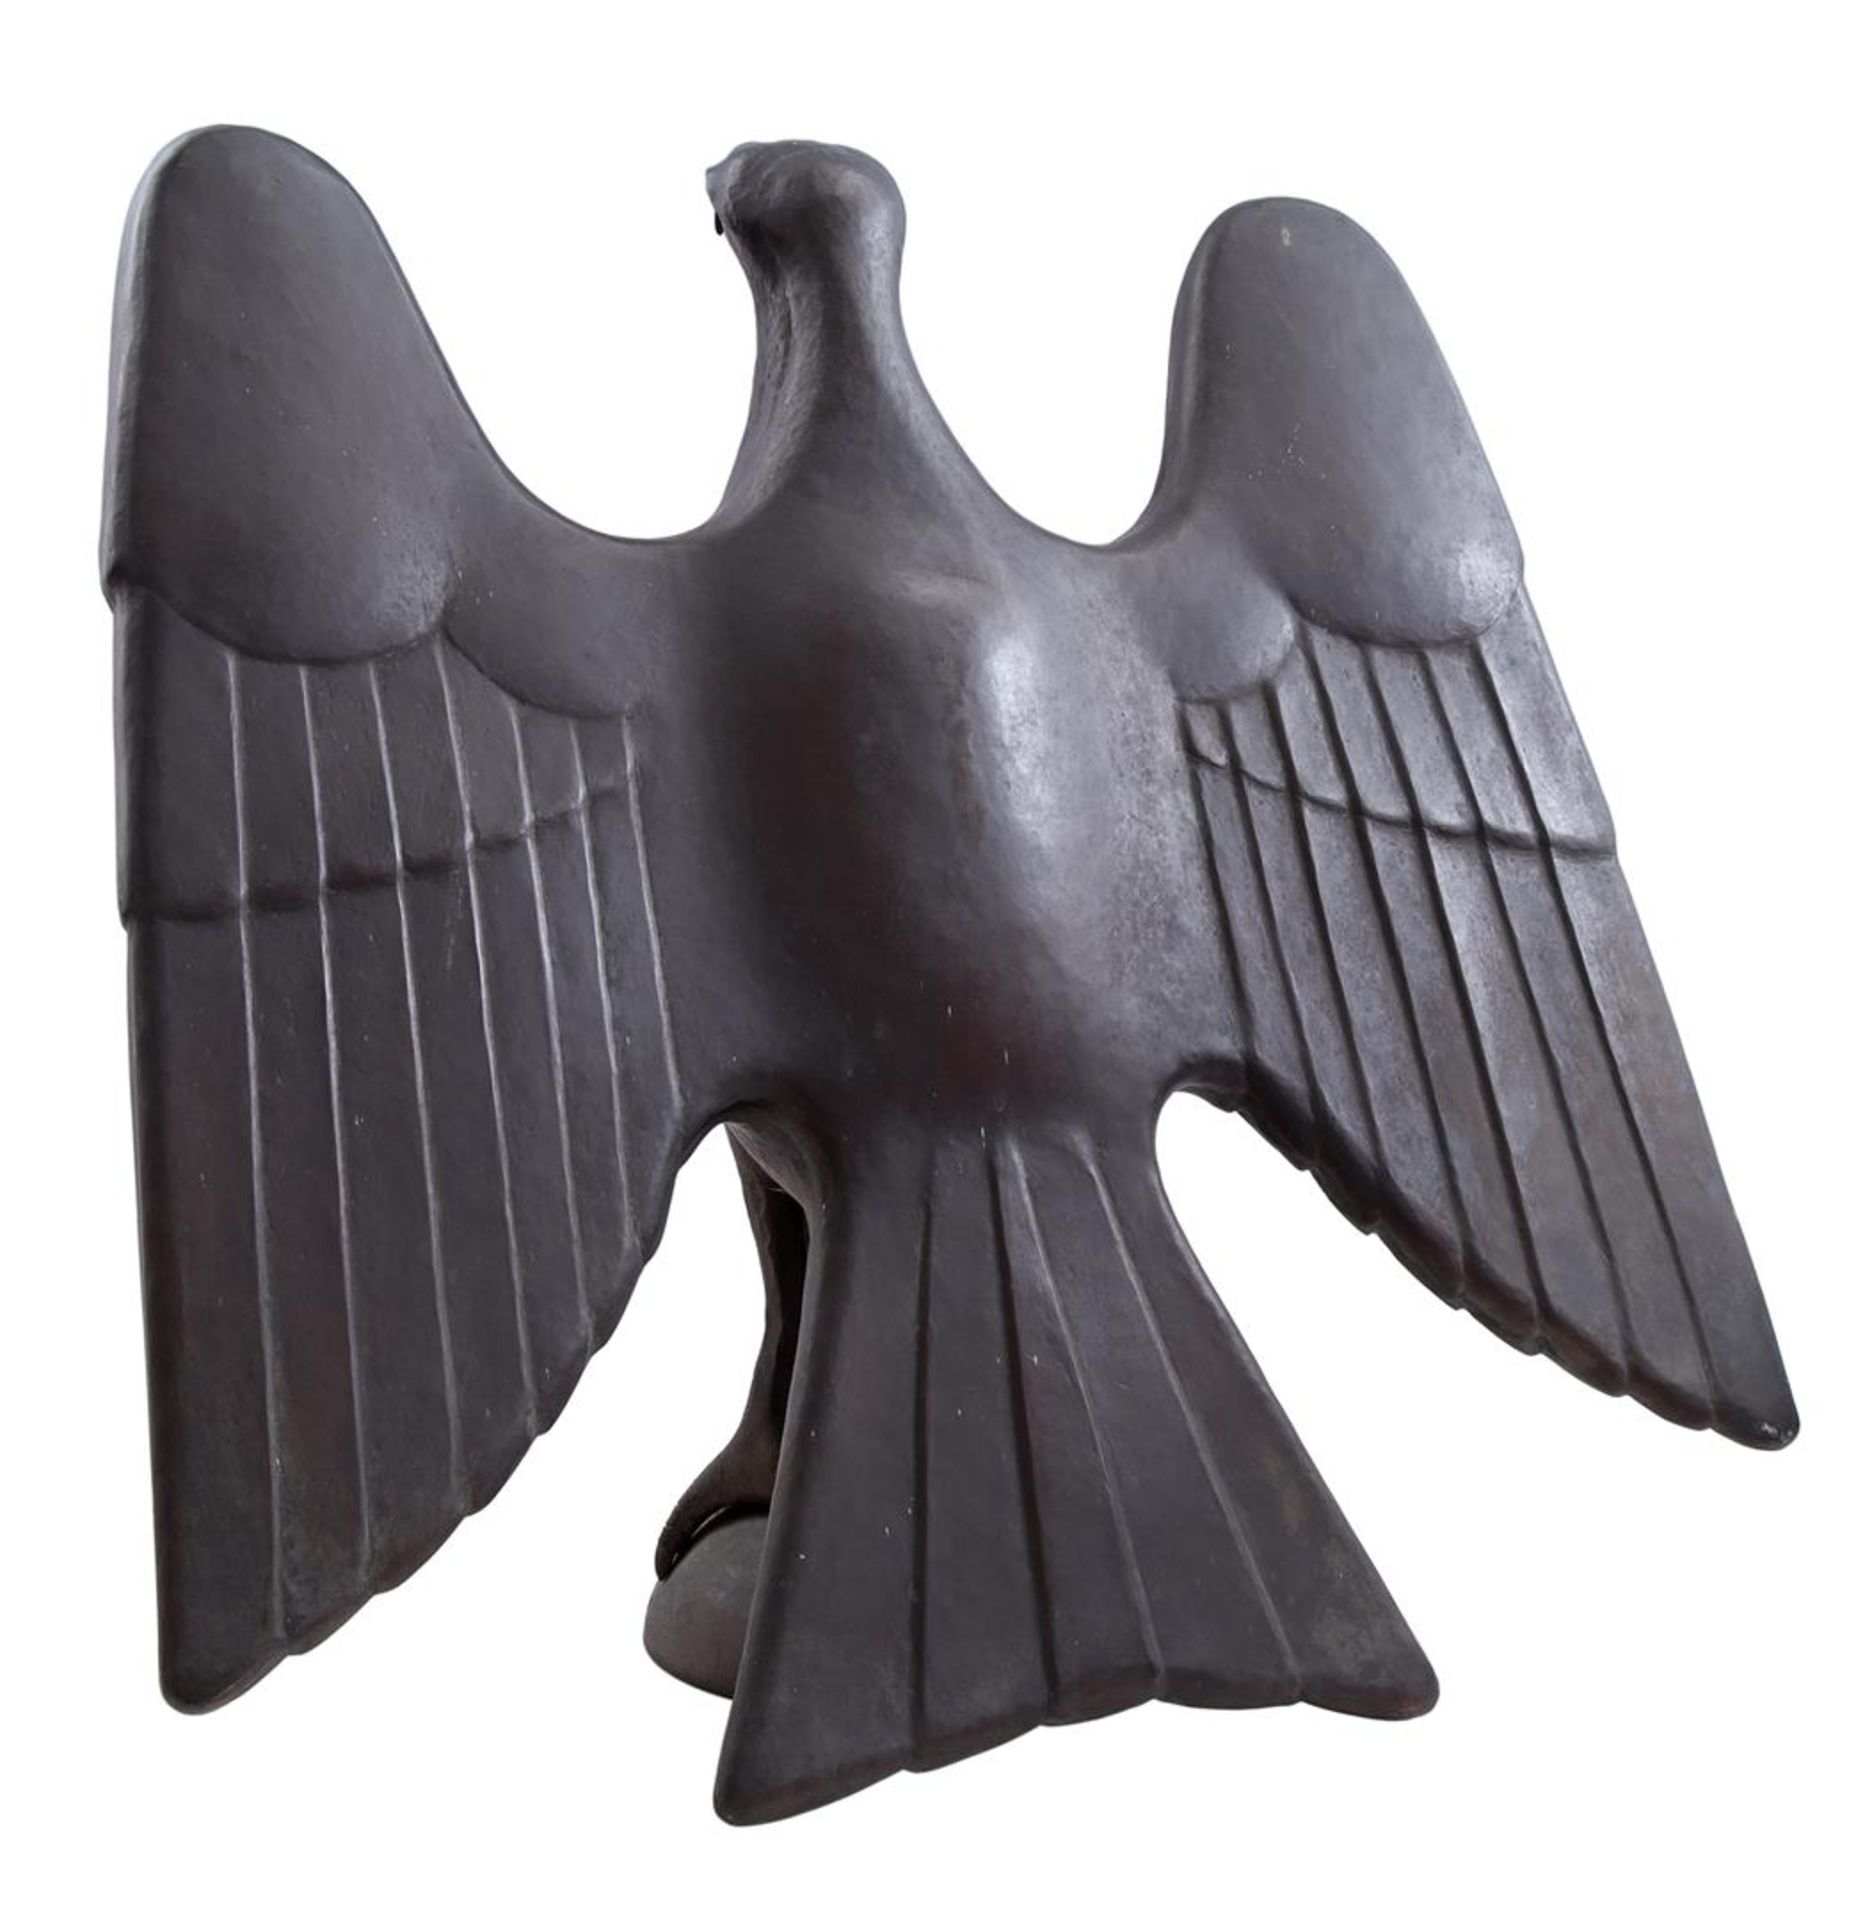 Hammered copper statue of an eagle - Image 4 of 4